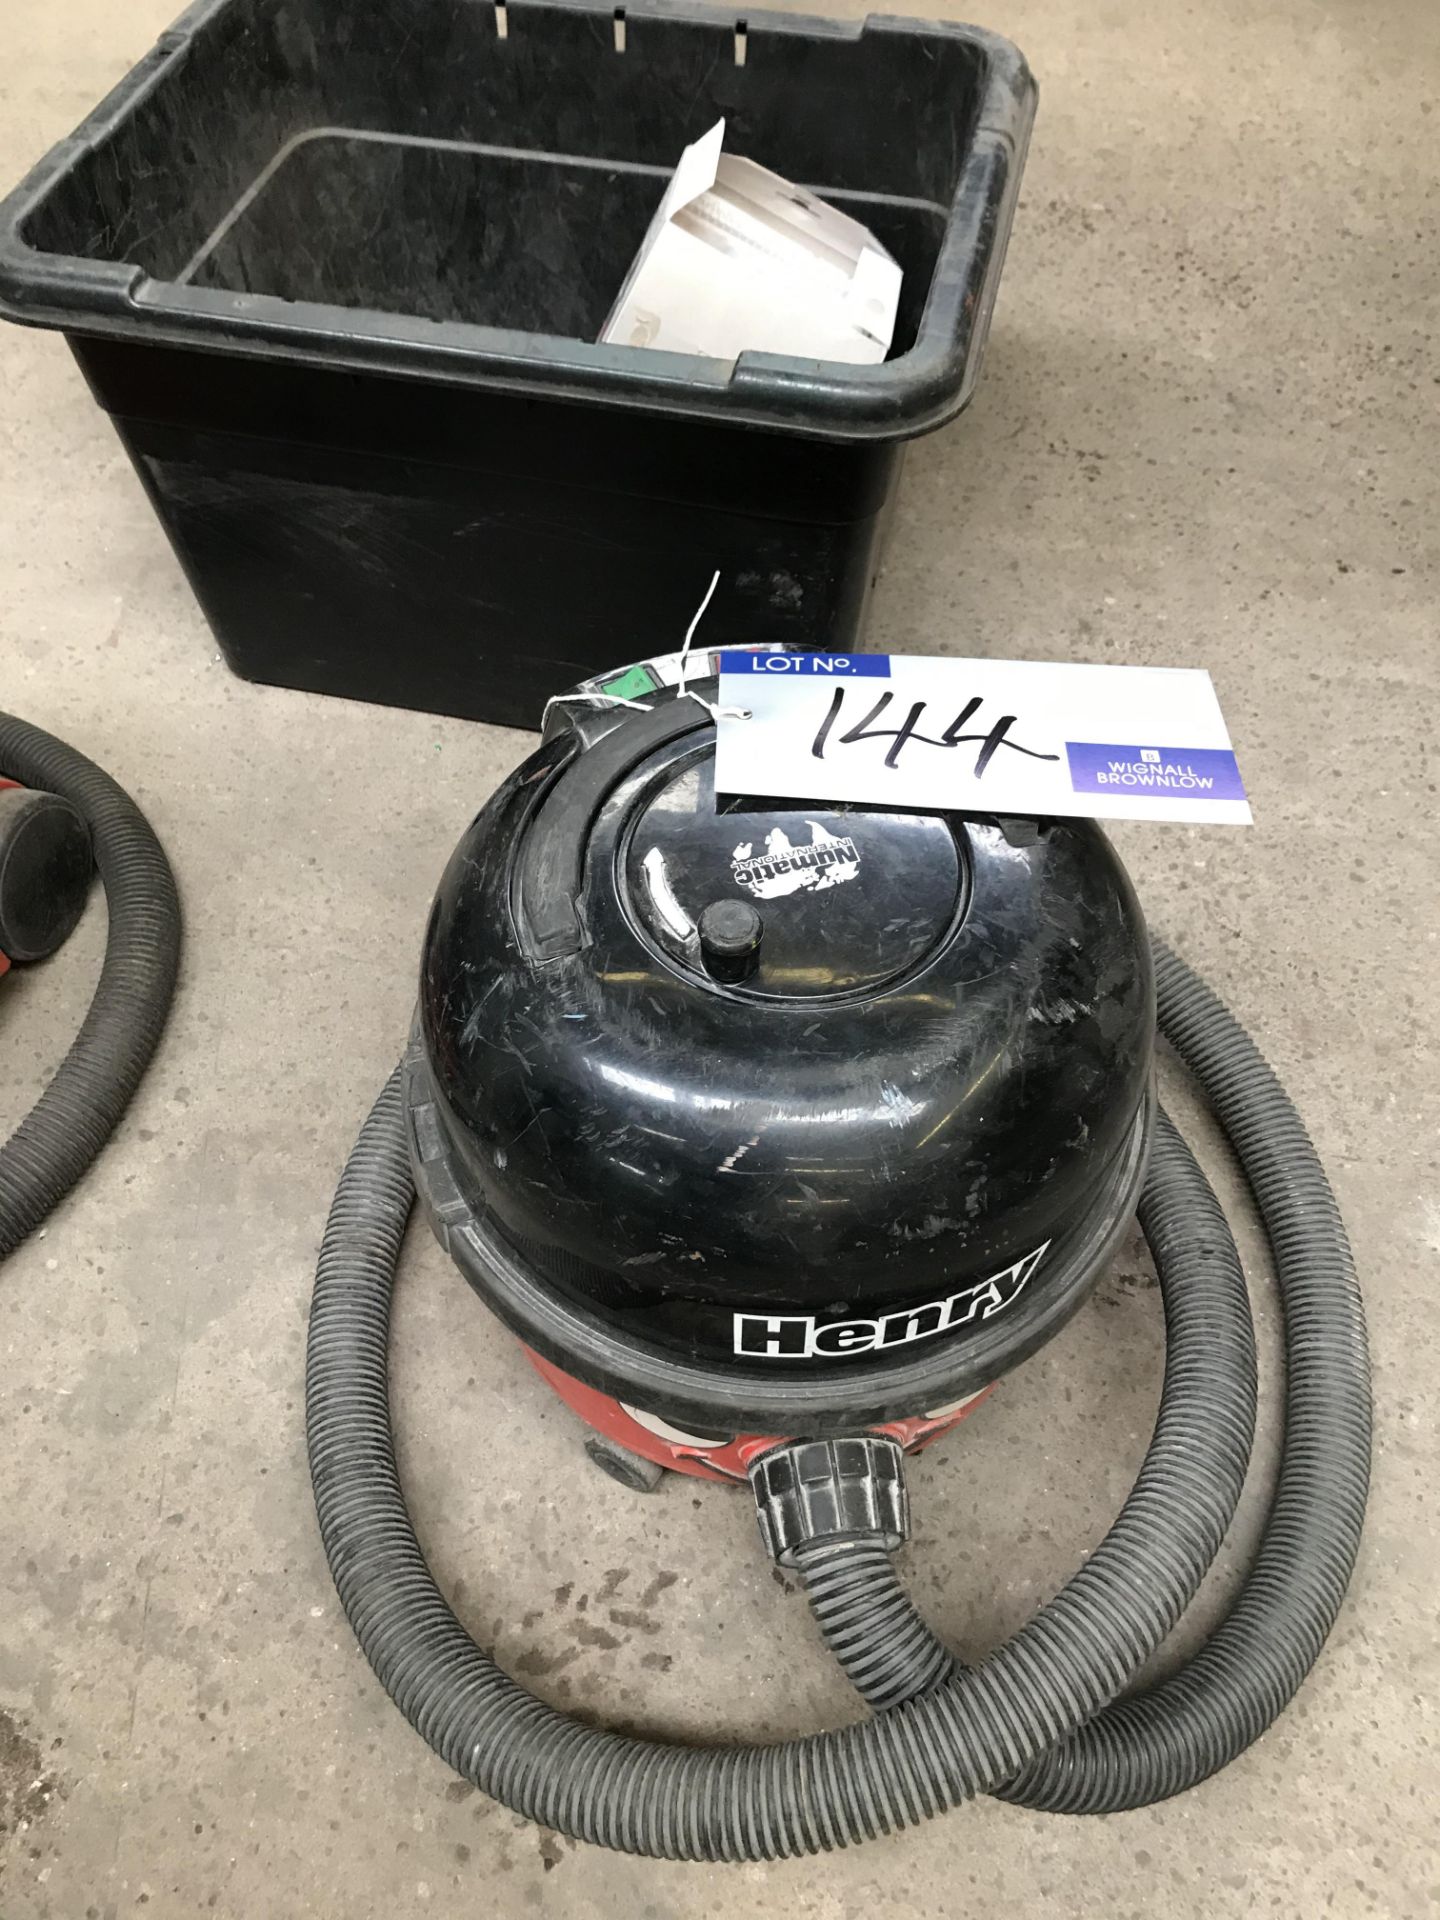 A Numatic NRV200-22 Henry Type Vacuum Cleaner No.163306176, 110v.